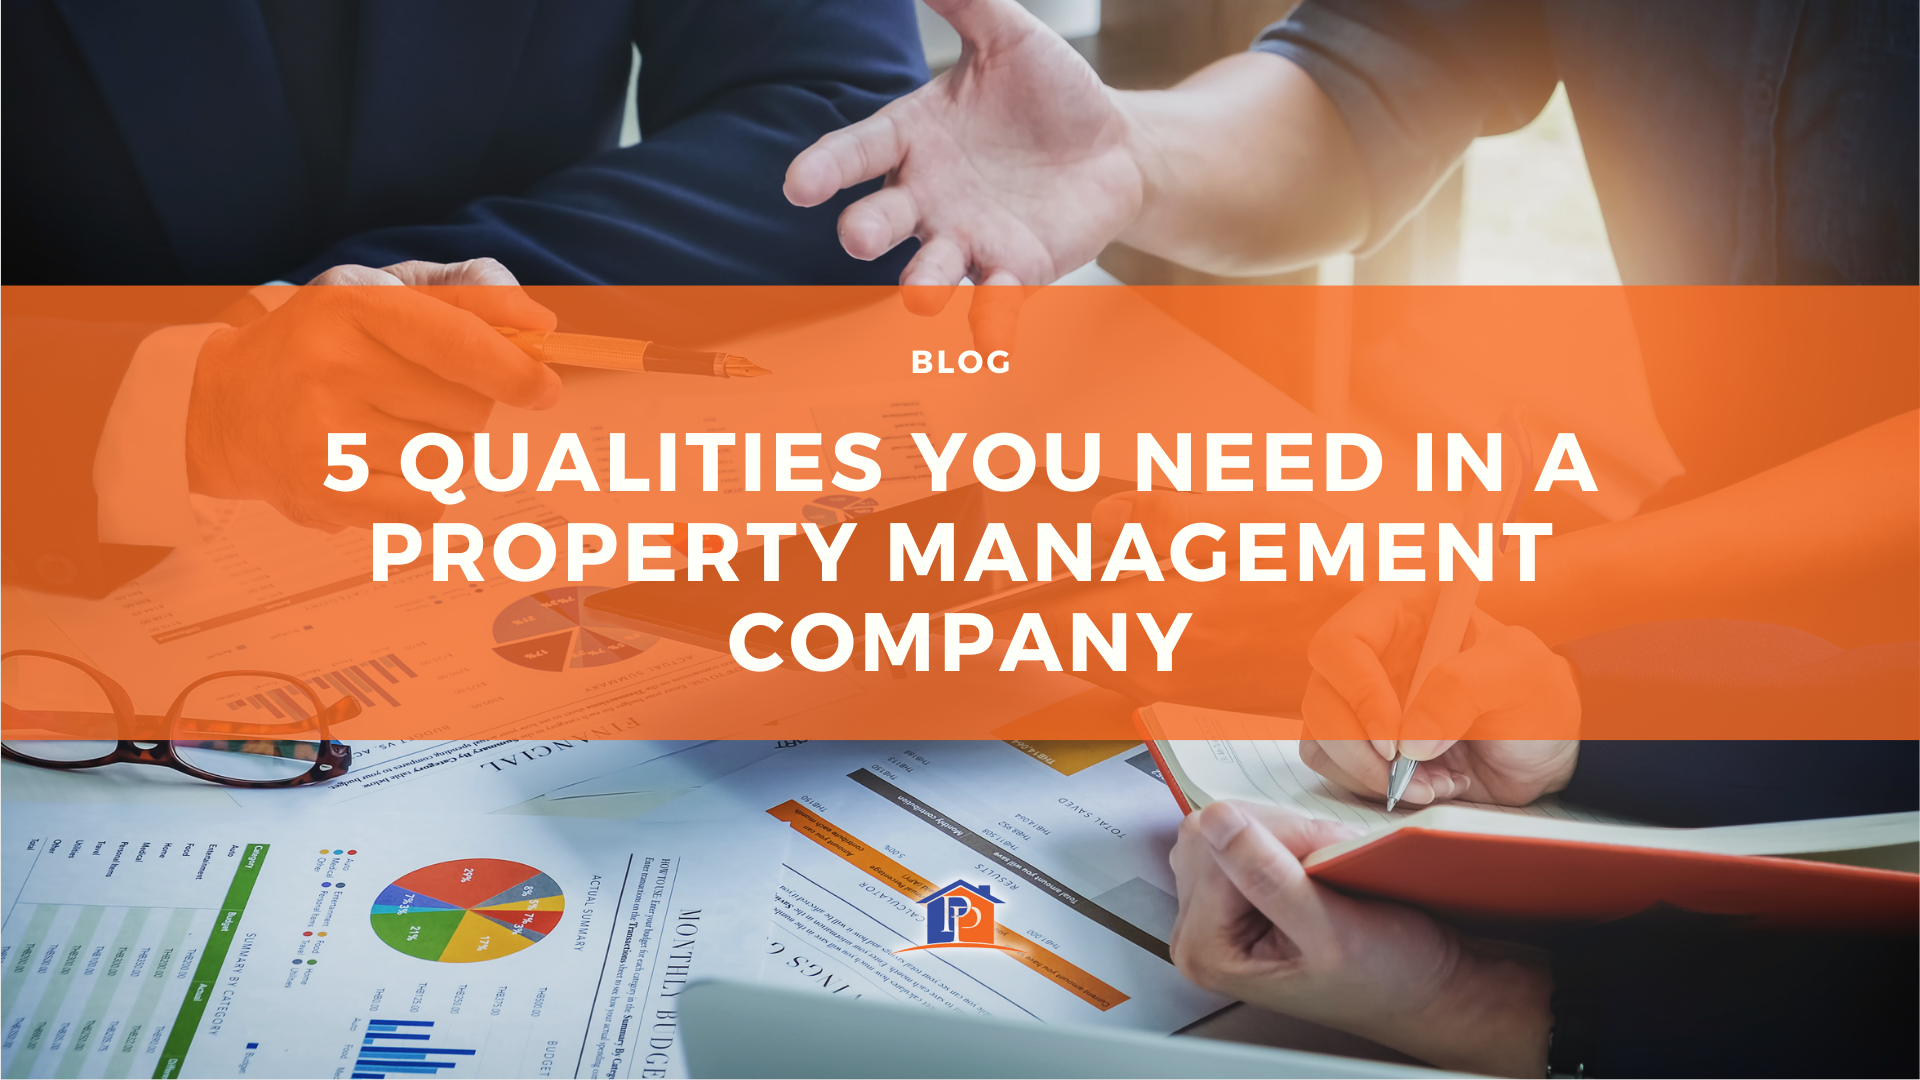 5 Qualities You Need in a Property Management Company